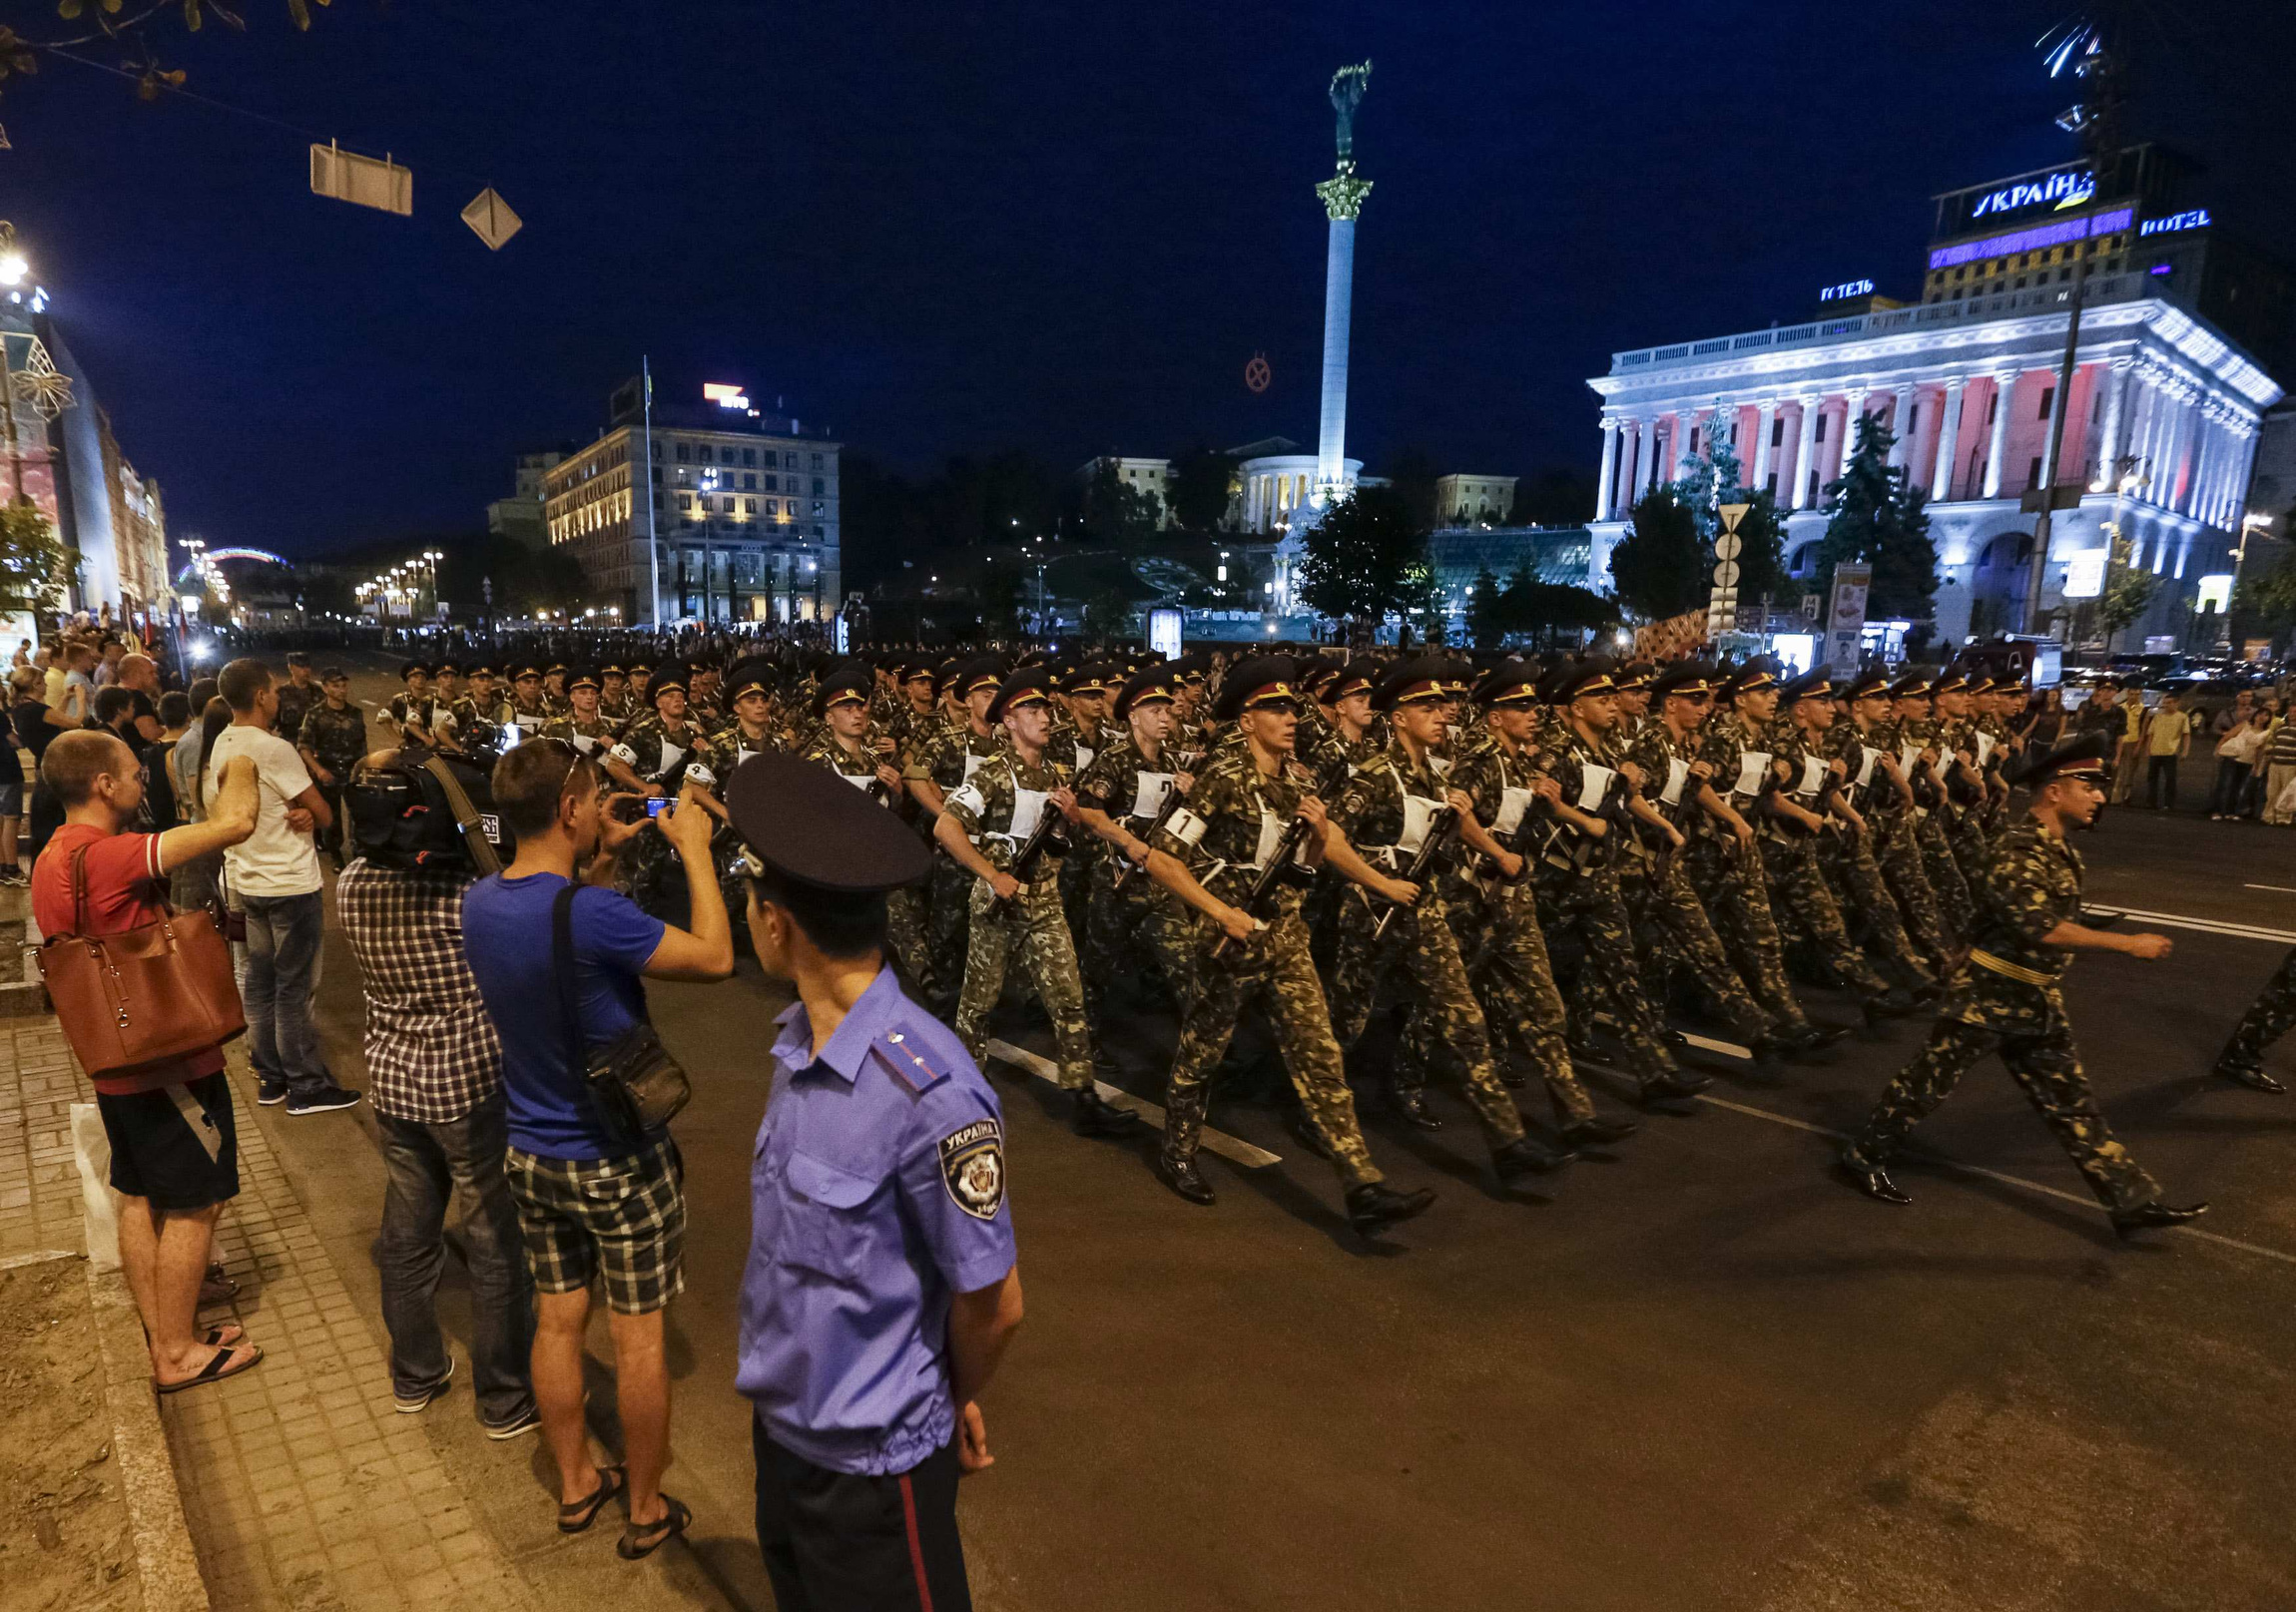 Ukrainian soldiers march along a street during a rehearsal for the Independence Day parade in Kiev Aug. 20. The parade will take place Aug. 24. (CNS/Reuters/Gleb Garanich) 